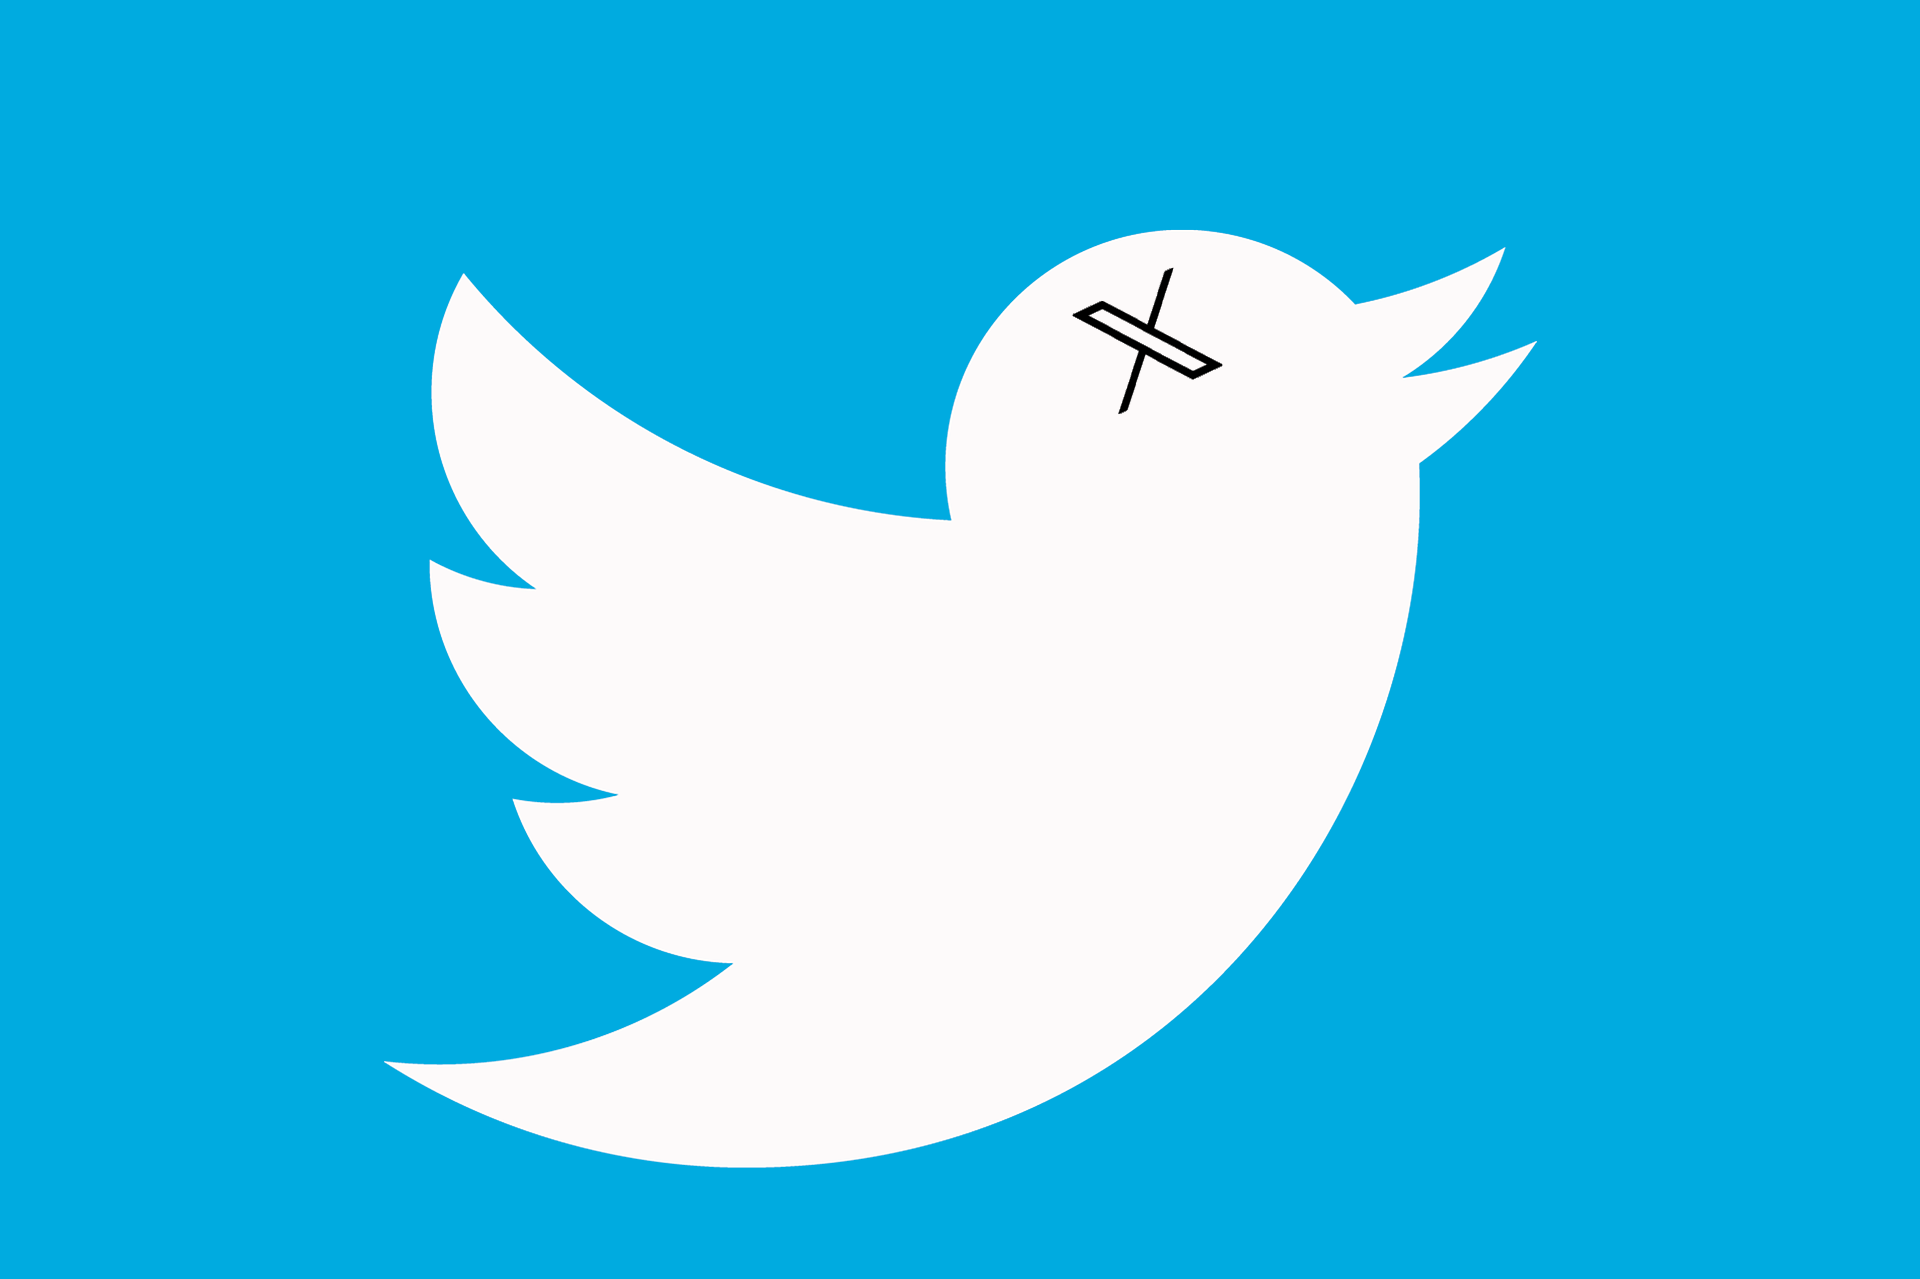 Goodbye to the iconic blue bird, they announce the end of the name of Twitter, an X came to replace it